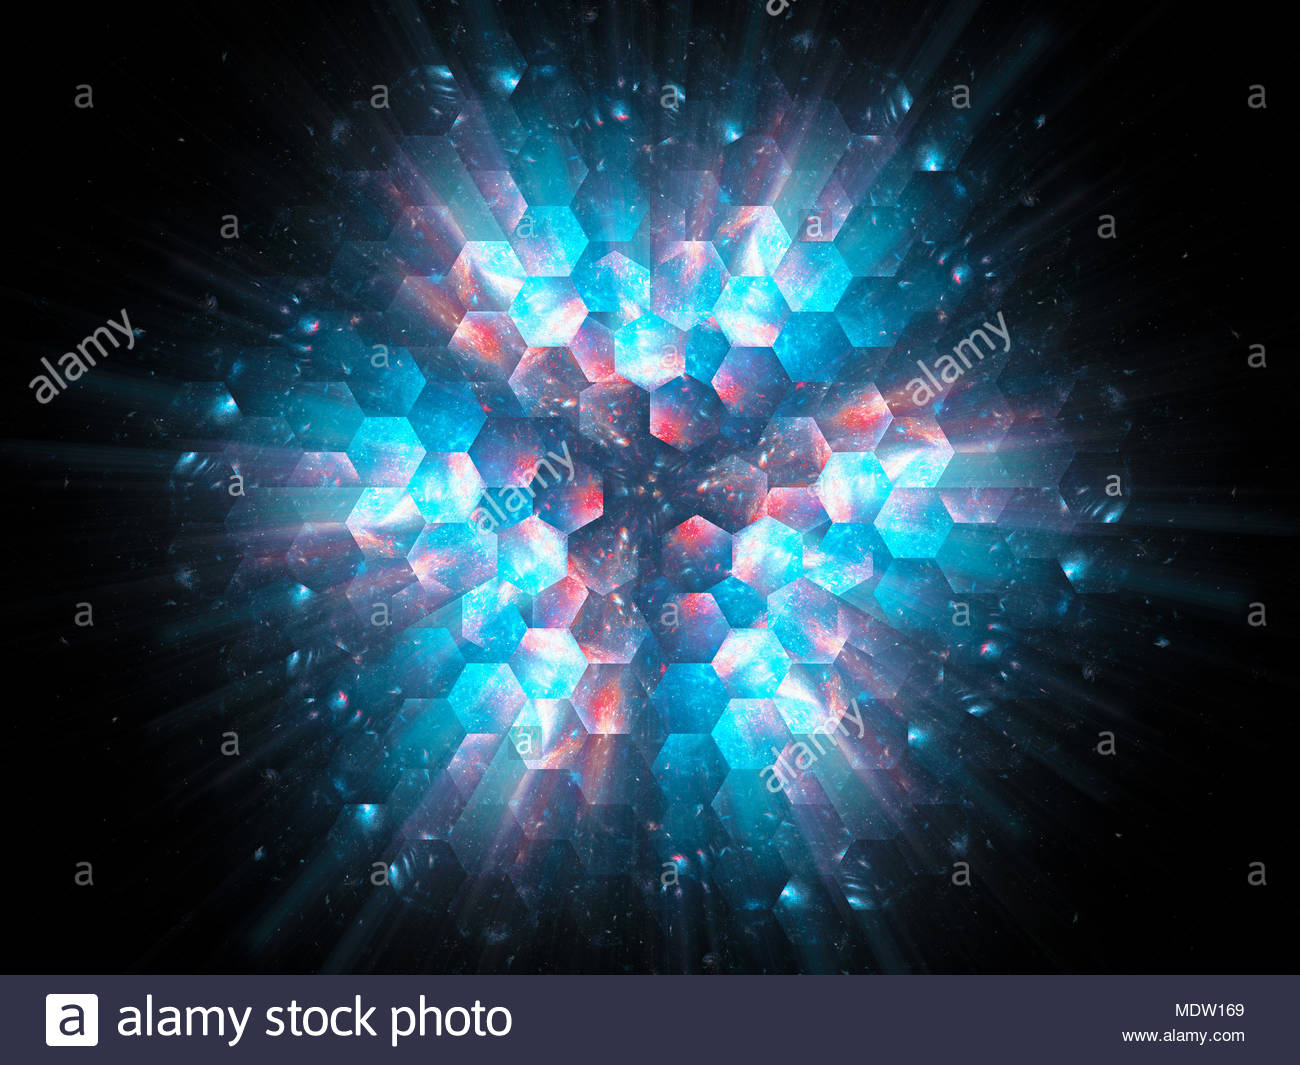 Colorful Vibrant Hexagons In Space Explosion New Technology